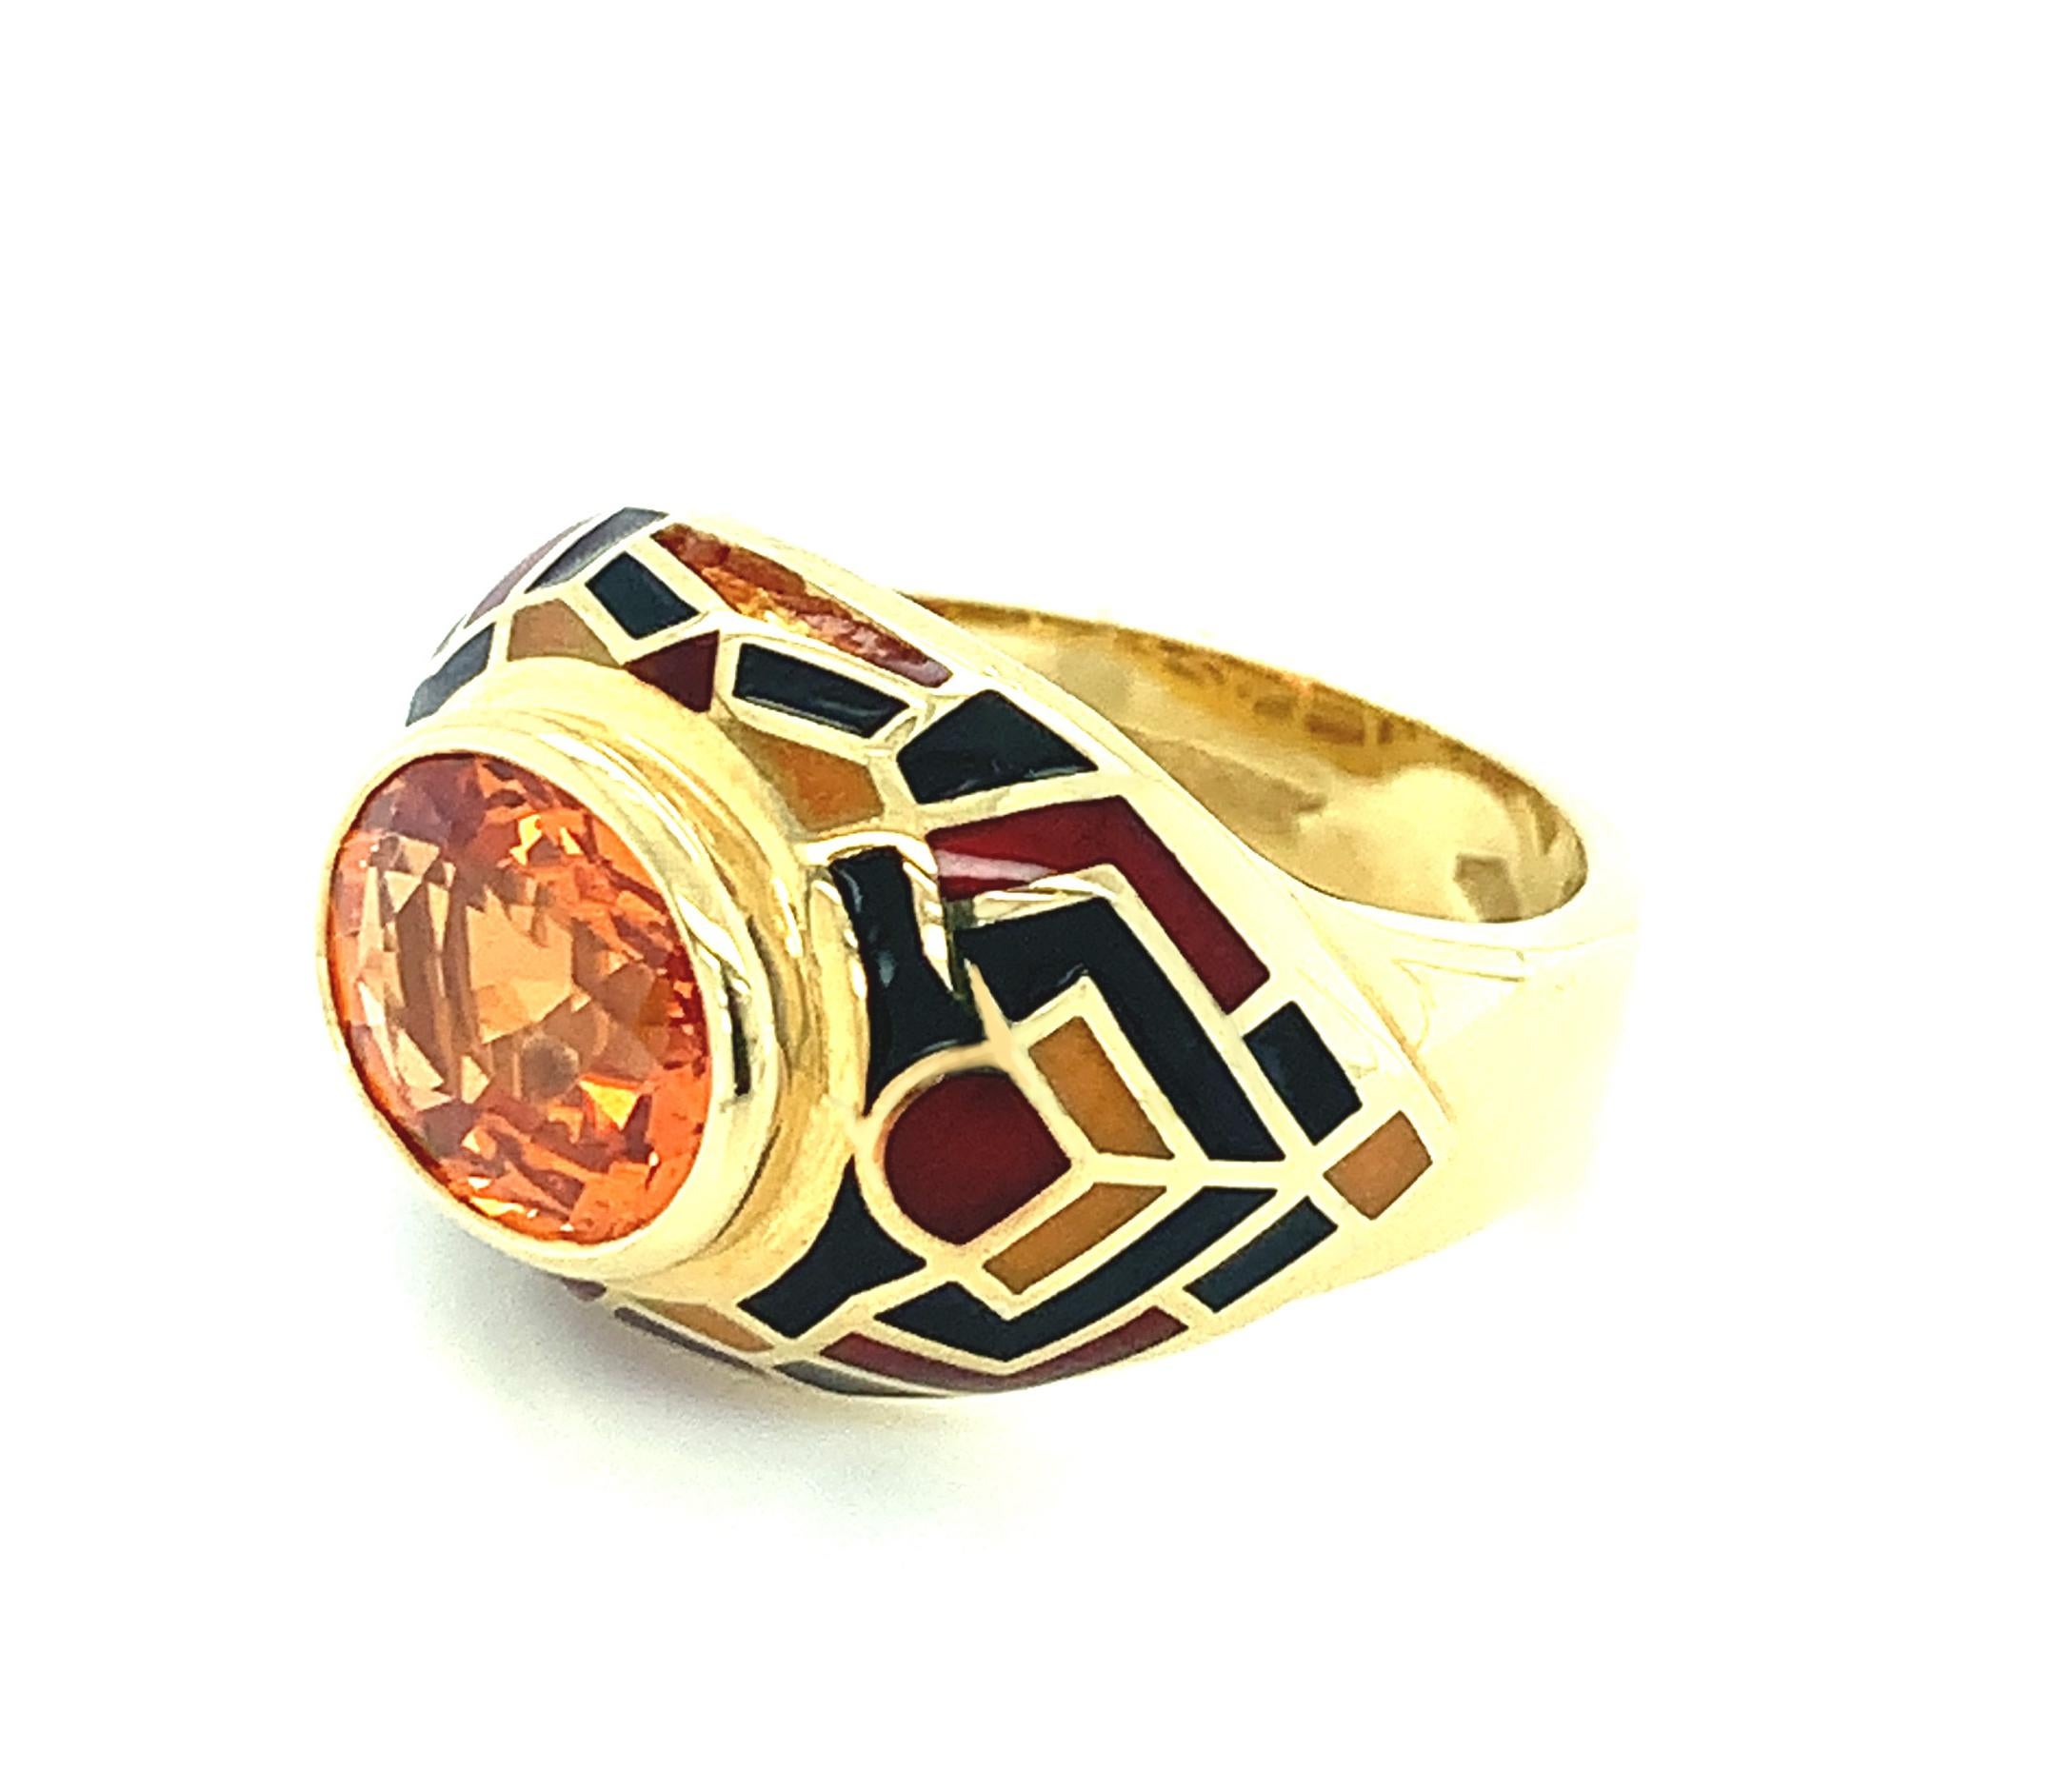 Women's or Men's Spessartite Garnet Ring in Gold with Multi-Colored Vitreous Enamel, 5.72 Carats For Sale